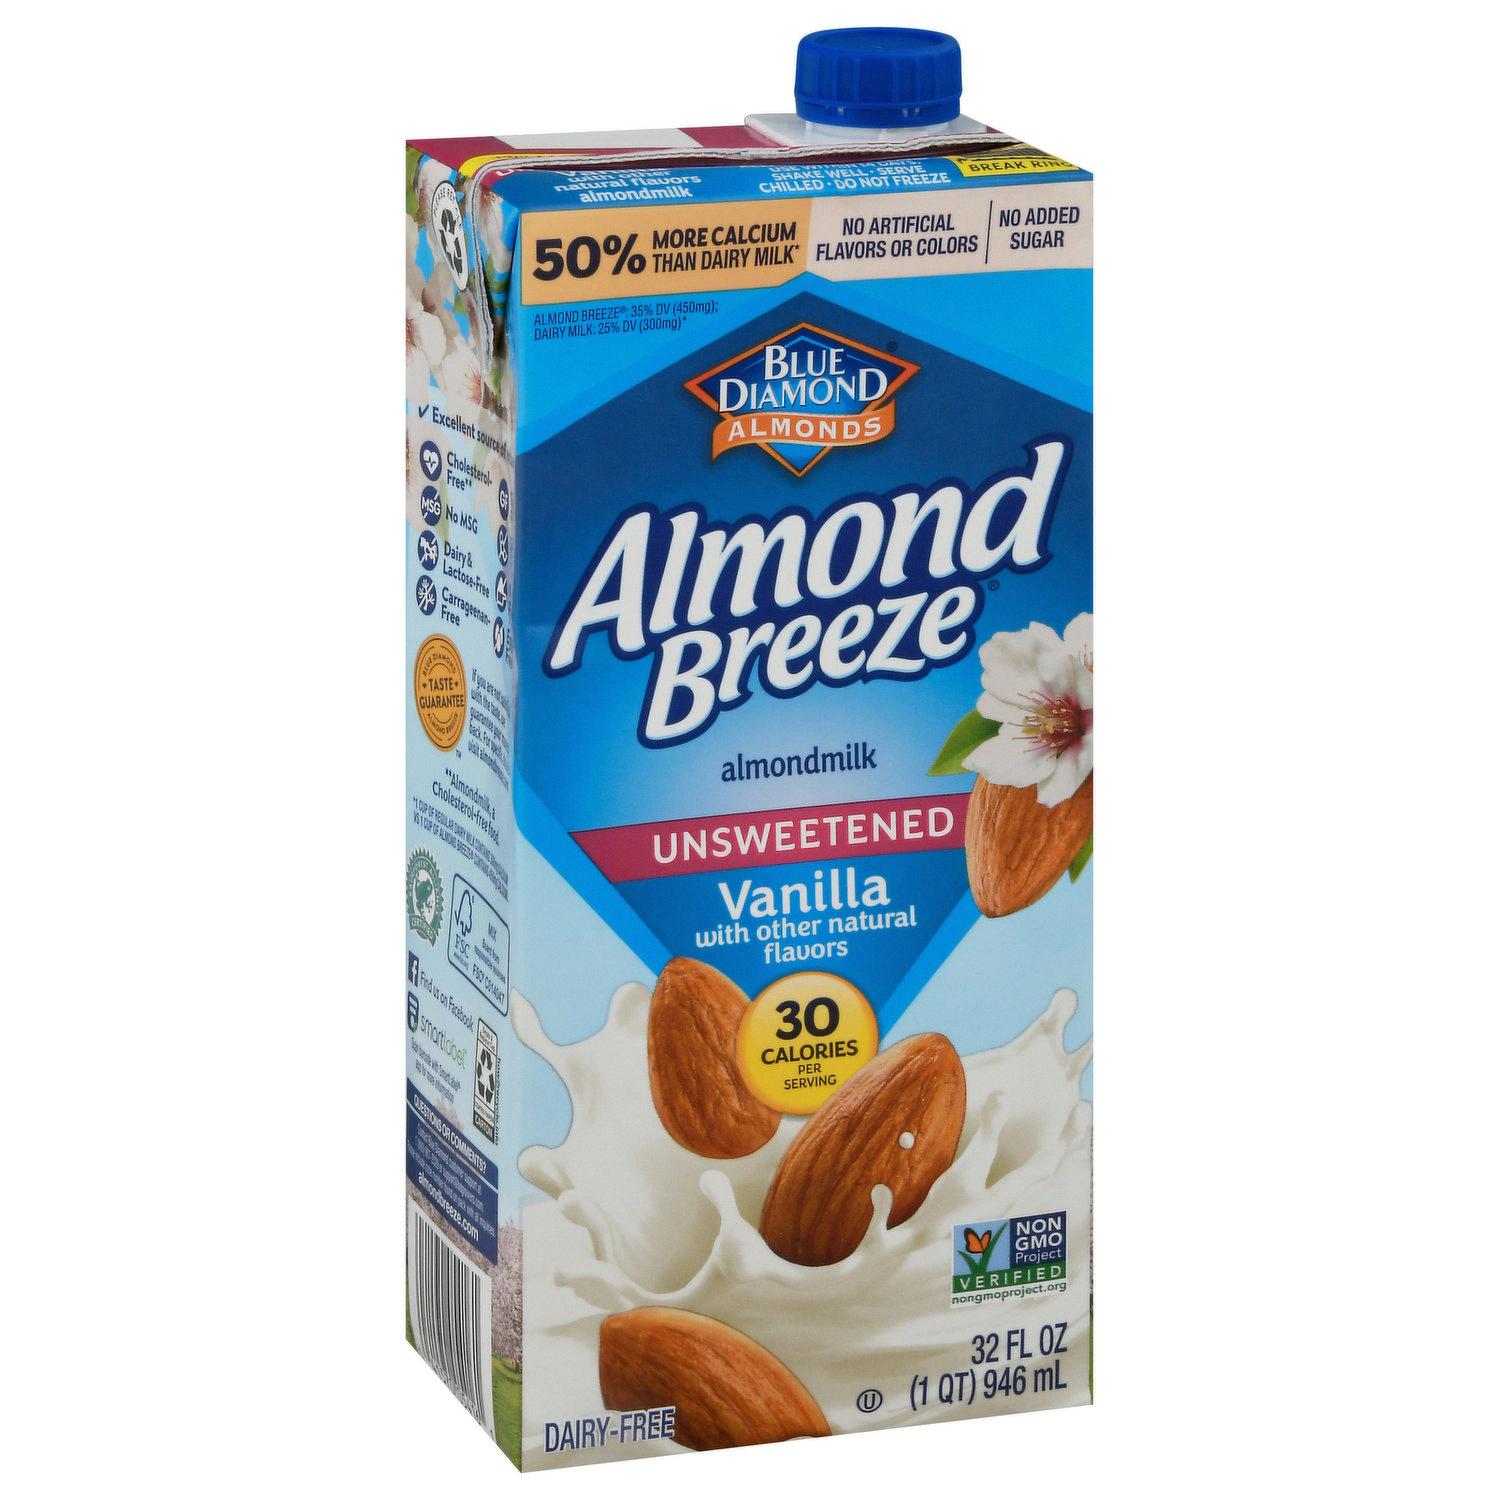 does almond breeze have carrageenan